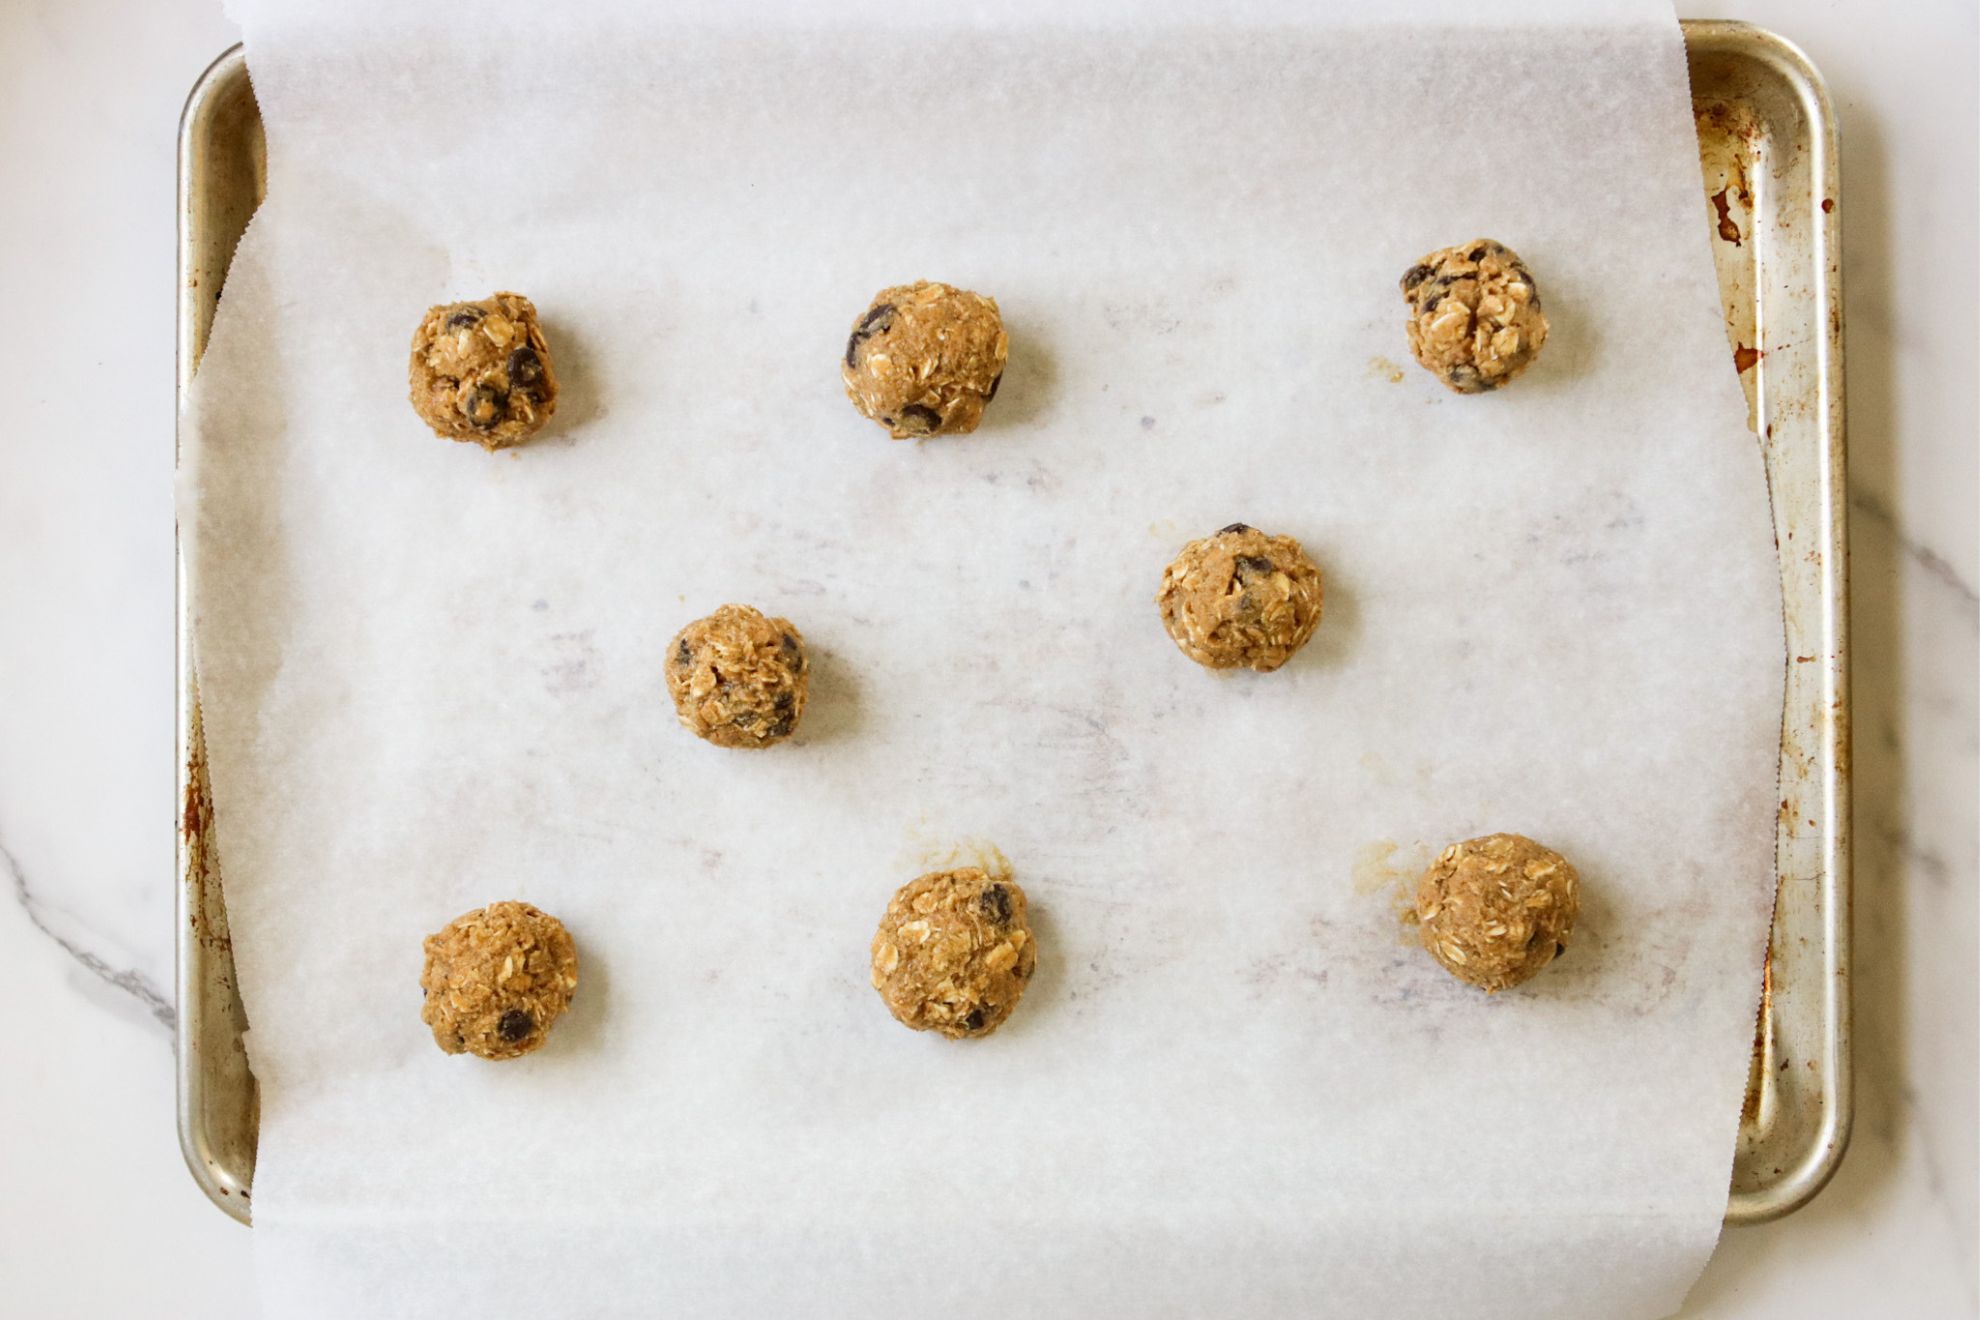 This is an overhead horizontal image of a baking sheet lined with parchment paper and eight cookie dough balls spaced a few inches apart. The pan sits on a light marble surface.